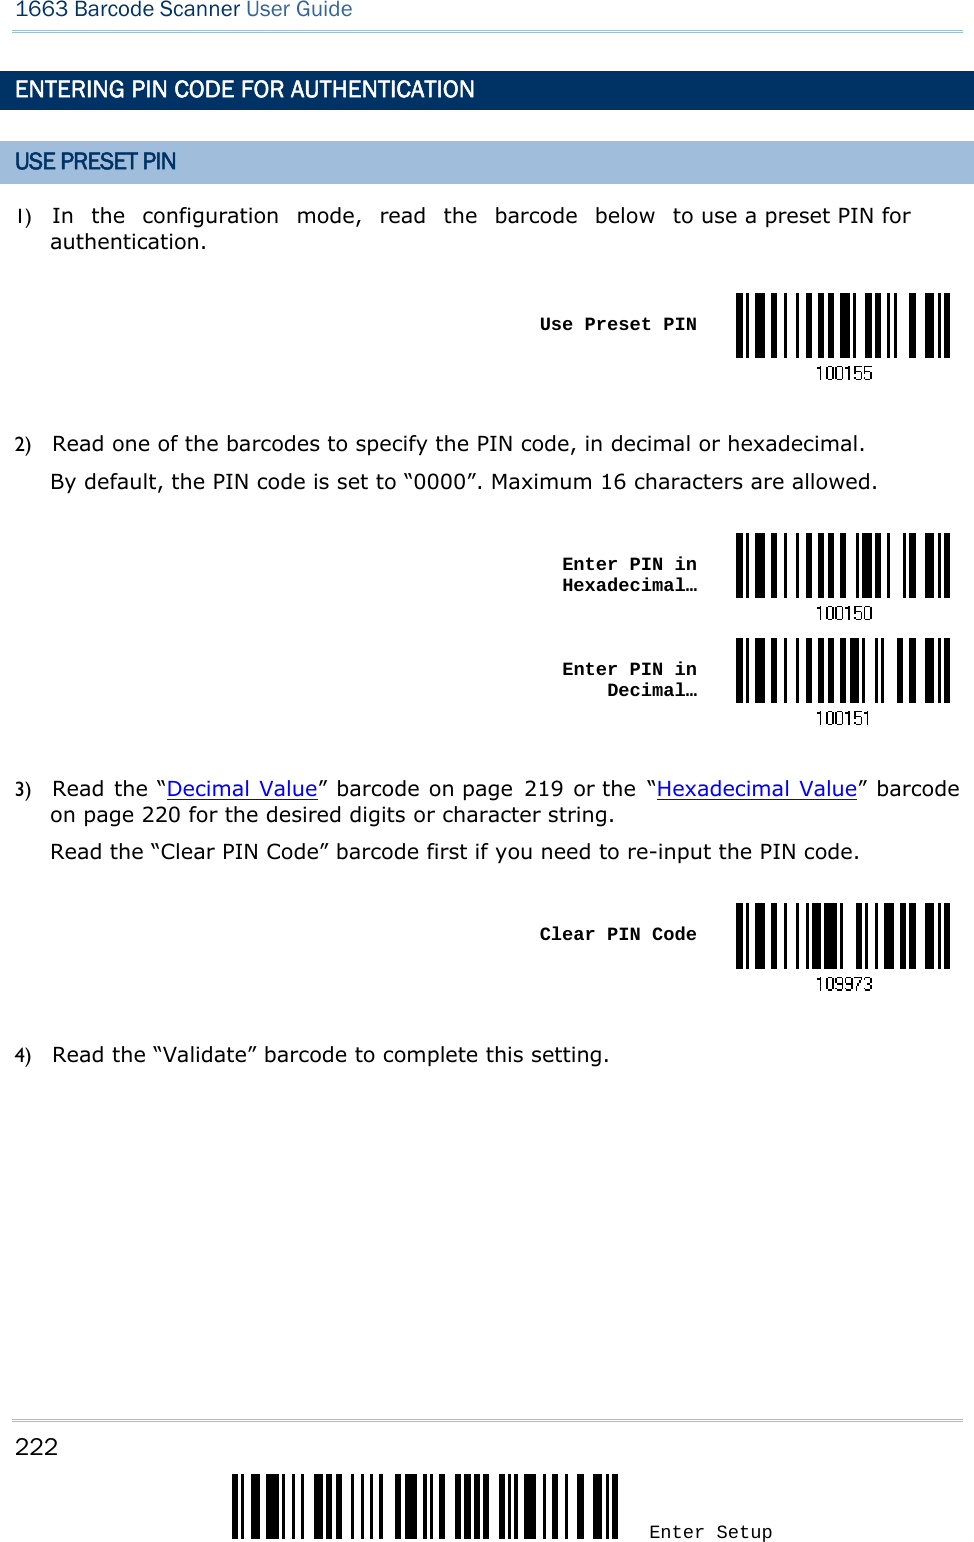 1663 Barcode Scanner User Guide  222 Enter Setup ENTERING PIN CODE FOR AUTHENTICATION USE PRESET PIN 1) In the configuration mode, read the barcode below to use a preset PIN for authentication.   Use Preset PIN 2) Read one of the barcodes to specify the PIN code, in decimal or hexadecimal.   By default, the PIN code is set to “0000”. Maximum 16 characters are allowed.   Enter PIN in Hexadecimal… Enter PIN in  Decimal… 3) Read the “Decimal Value” barcode on page 219 or the “Hexadecimal Value” barcode on page 220 for the desired digits or character string.   Read the “Clear PIN Code” barcode first if you need to re-input the PIN code.   Clear PIN Code 4) Read the “Validate” barcode to complete this setting.    